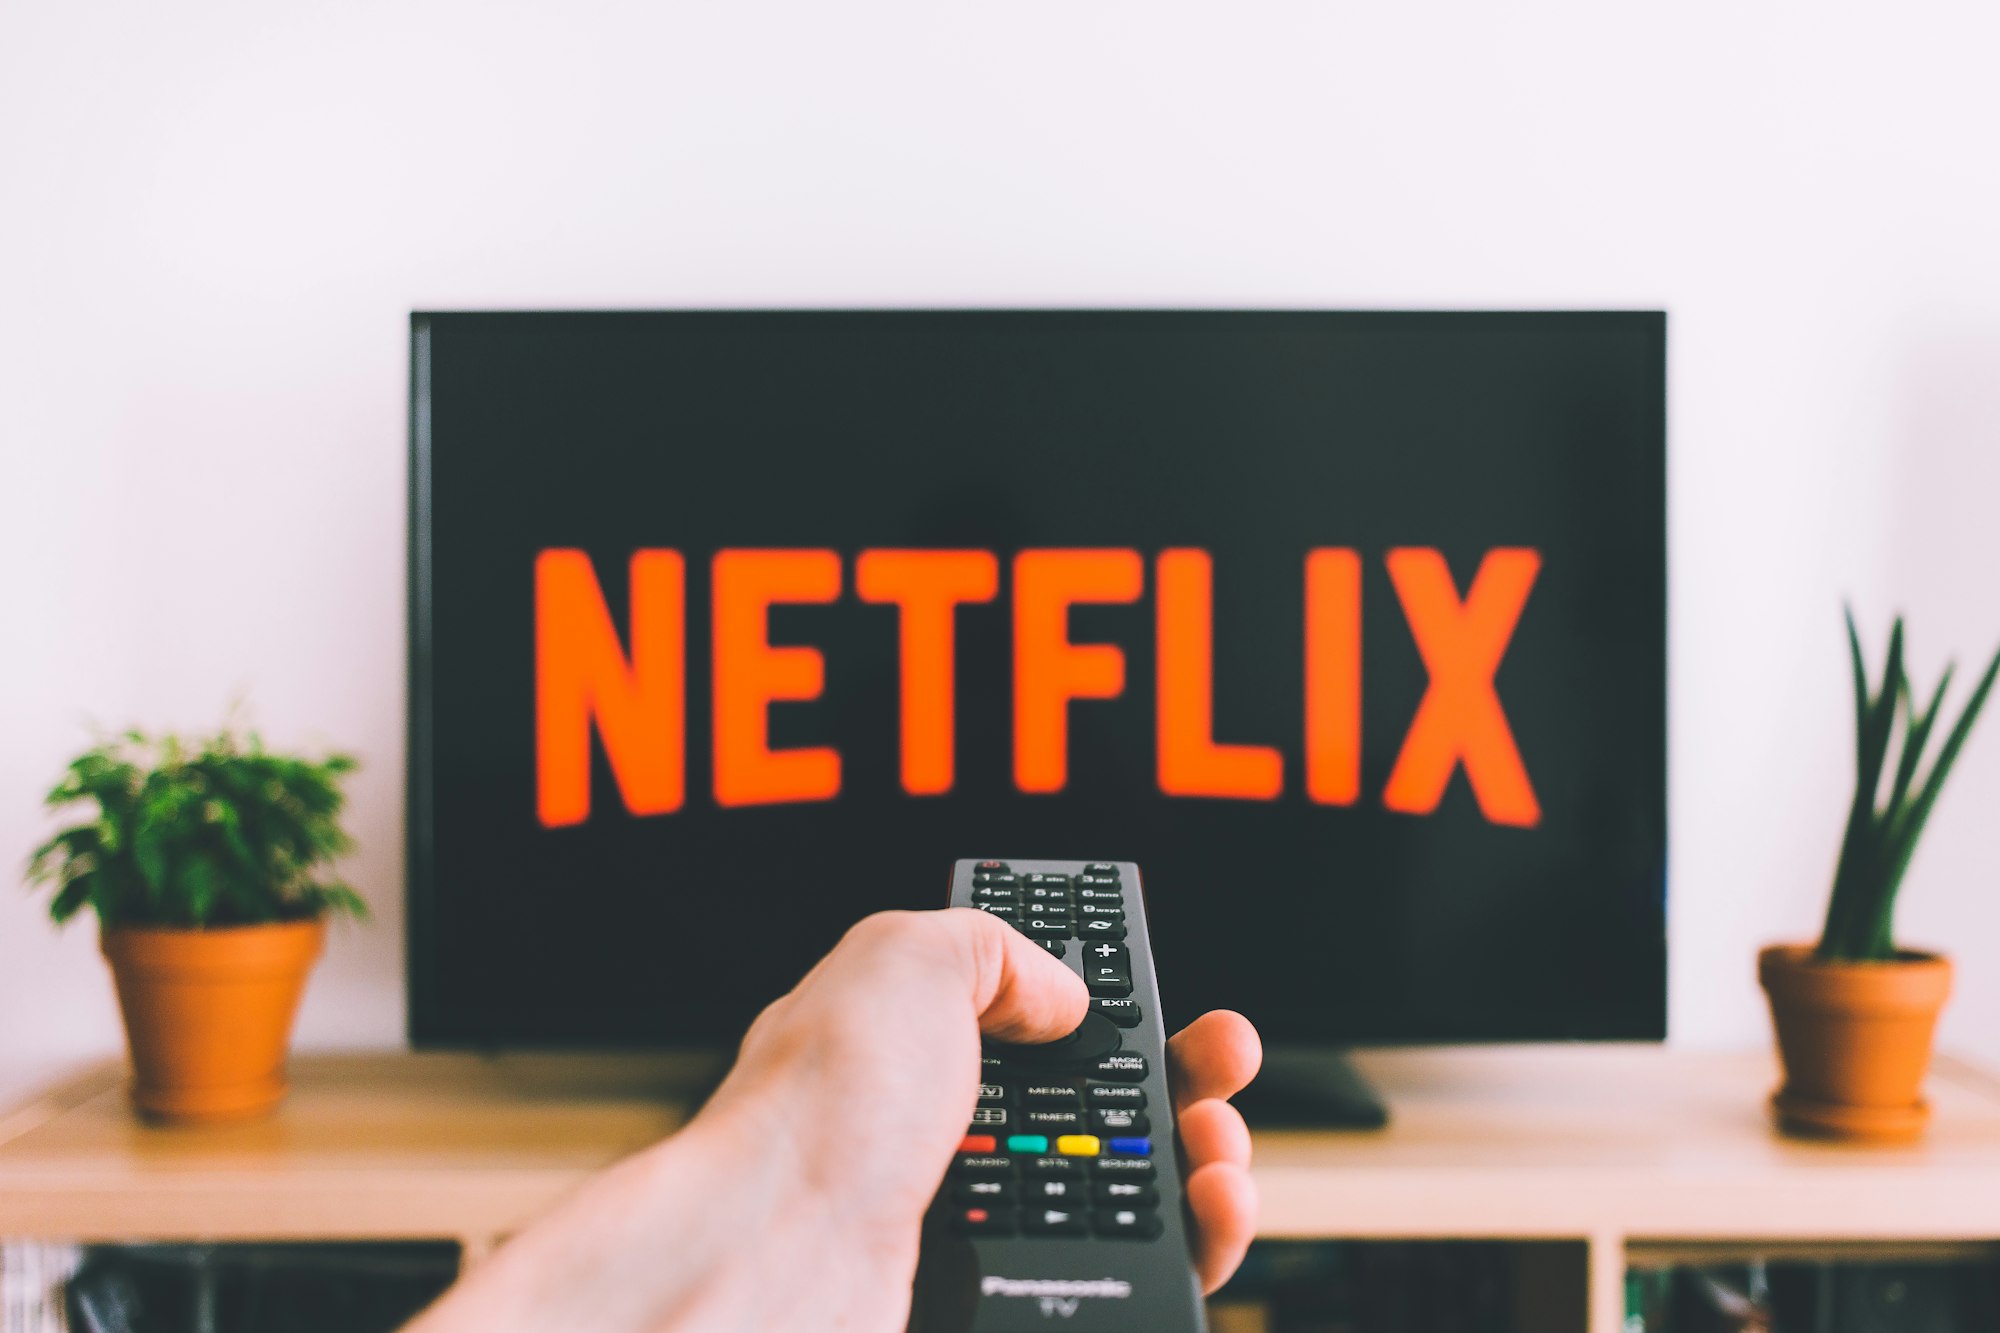 Netflix docks subscription prices in over 30 countries globally